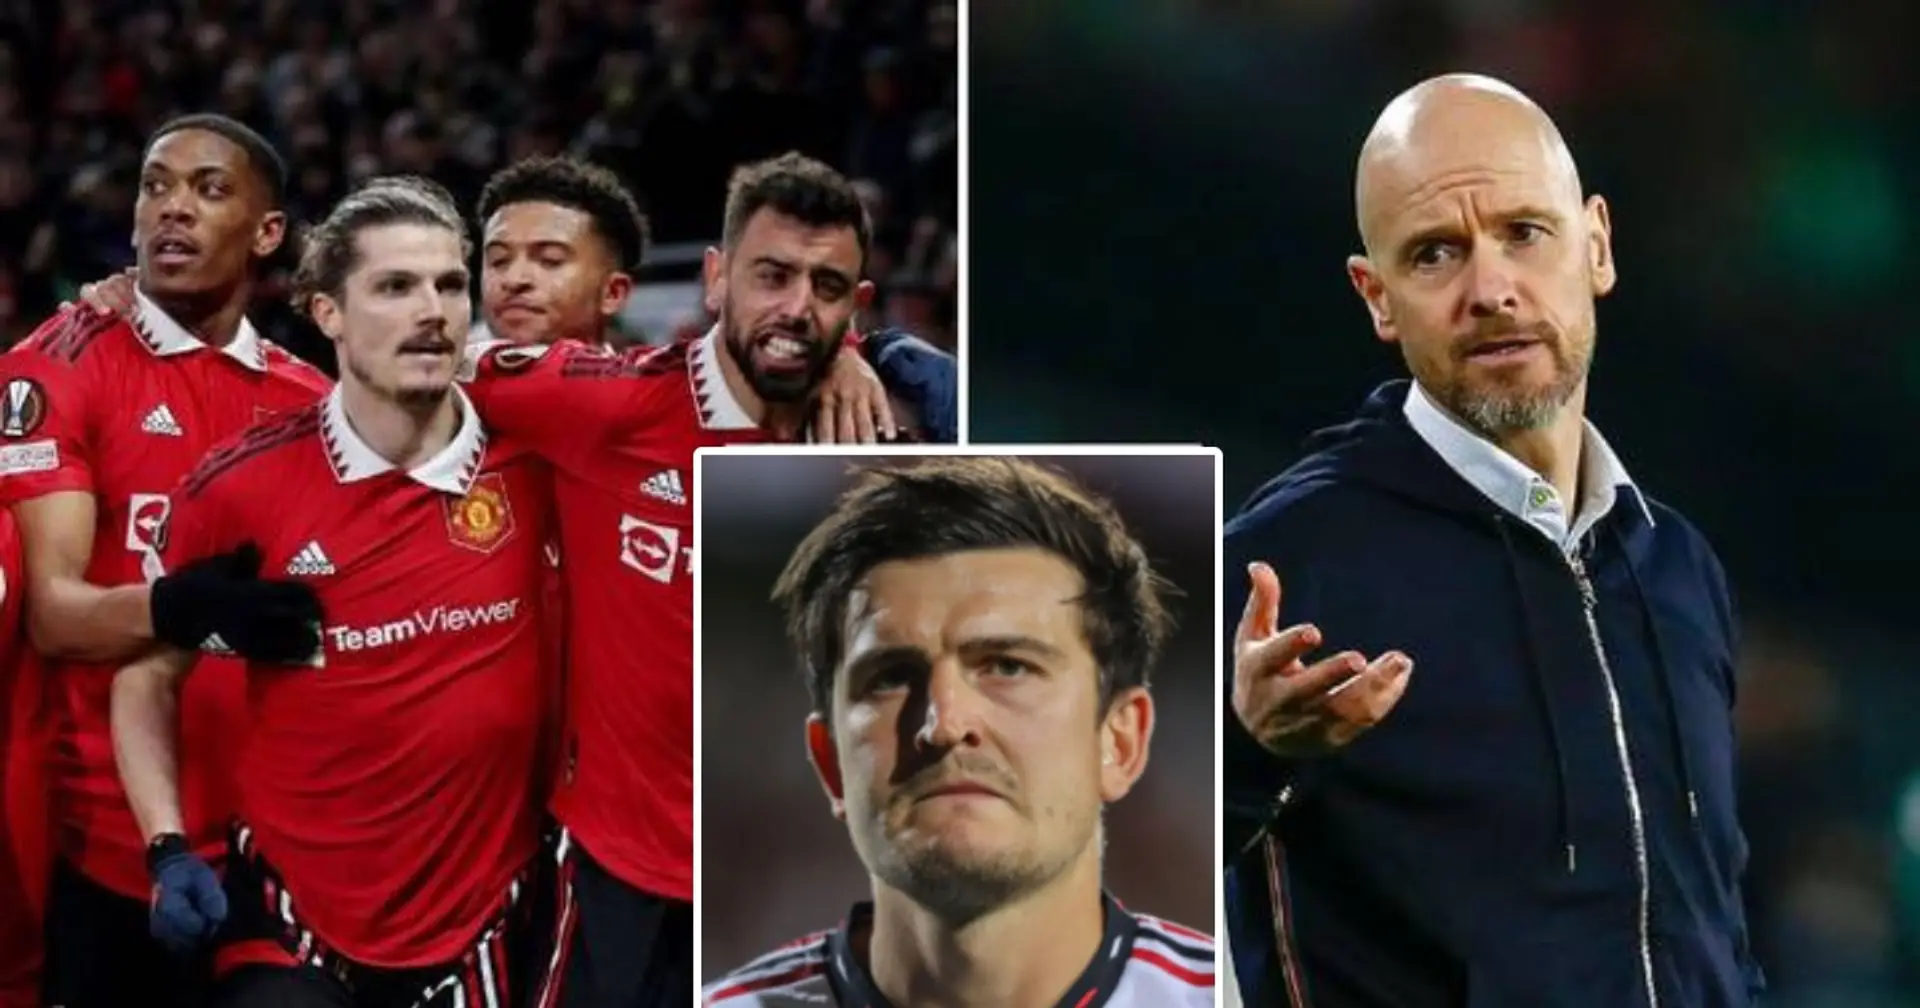 REVEALED: 15 players who could leave Man United this summer - they cost almost £400m  